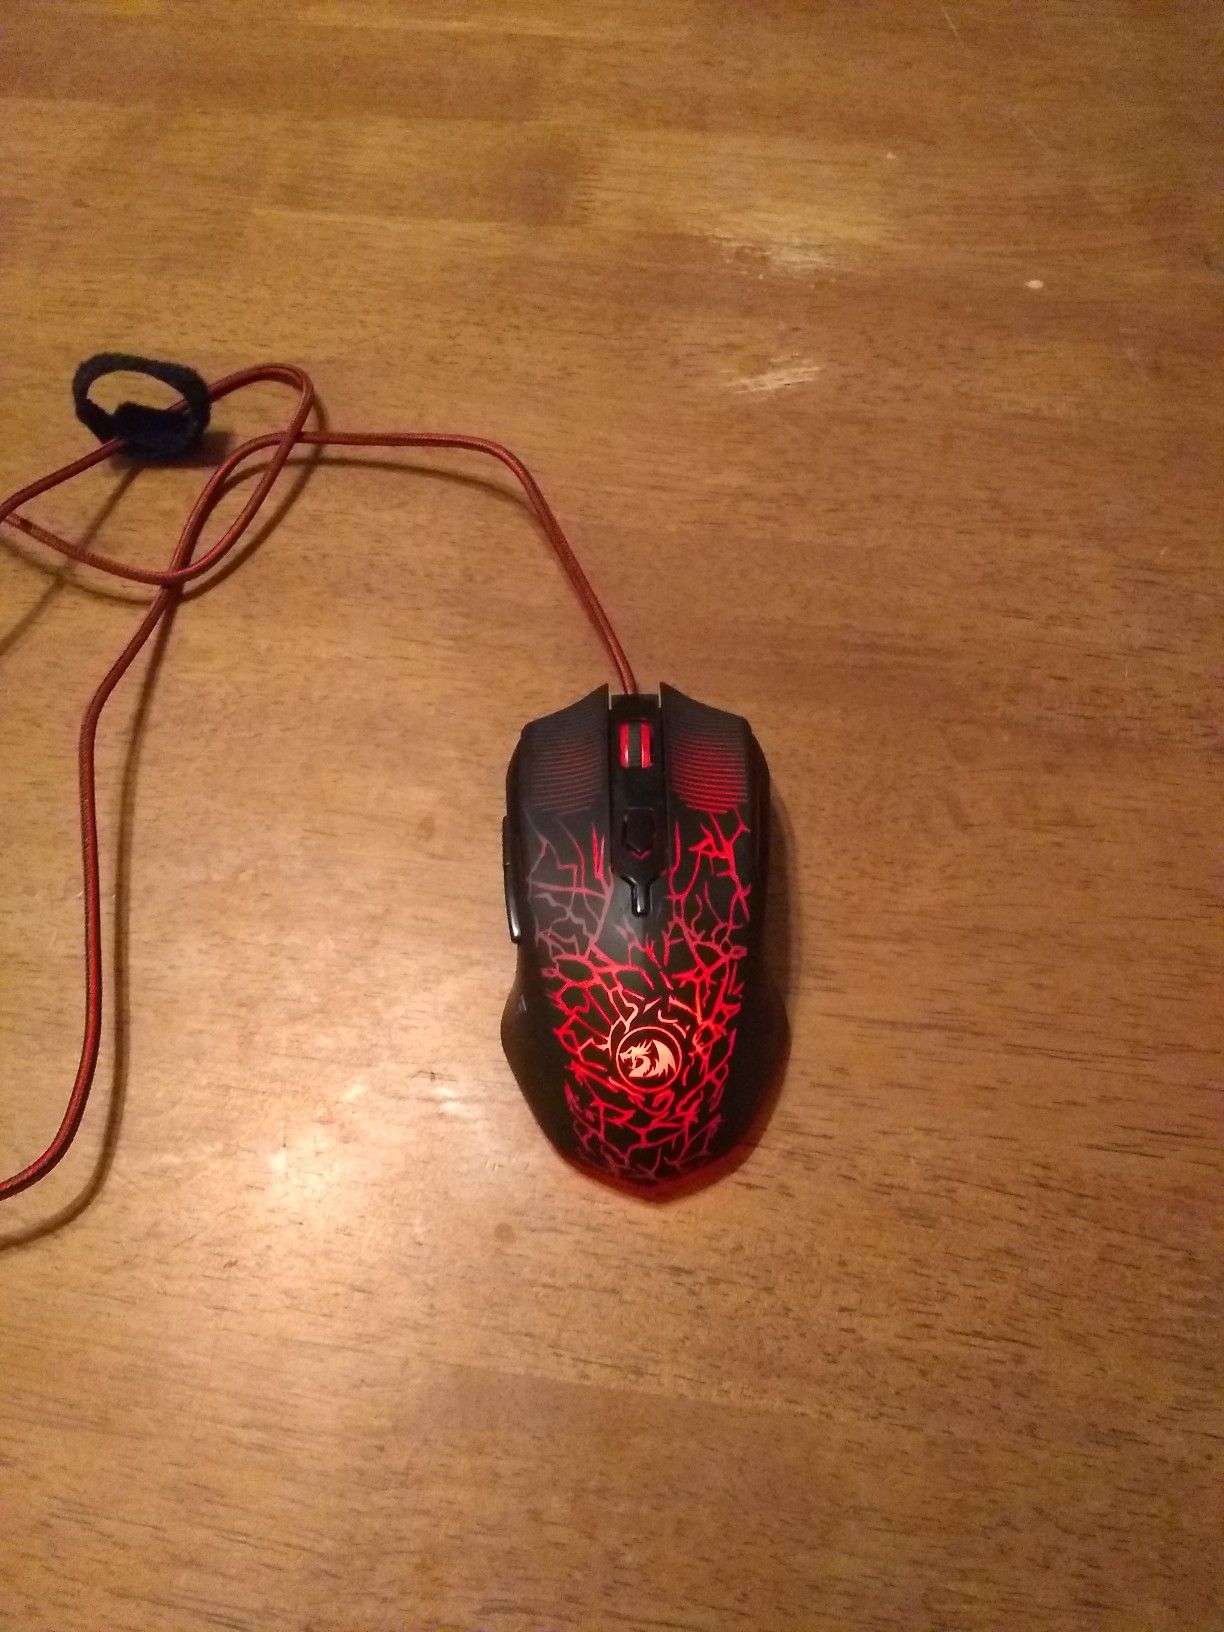 Redragon Mouse(broken on left click)